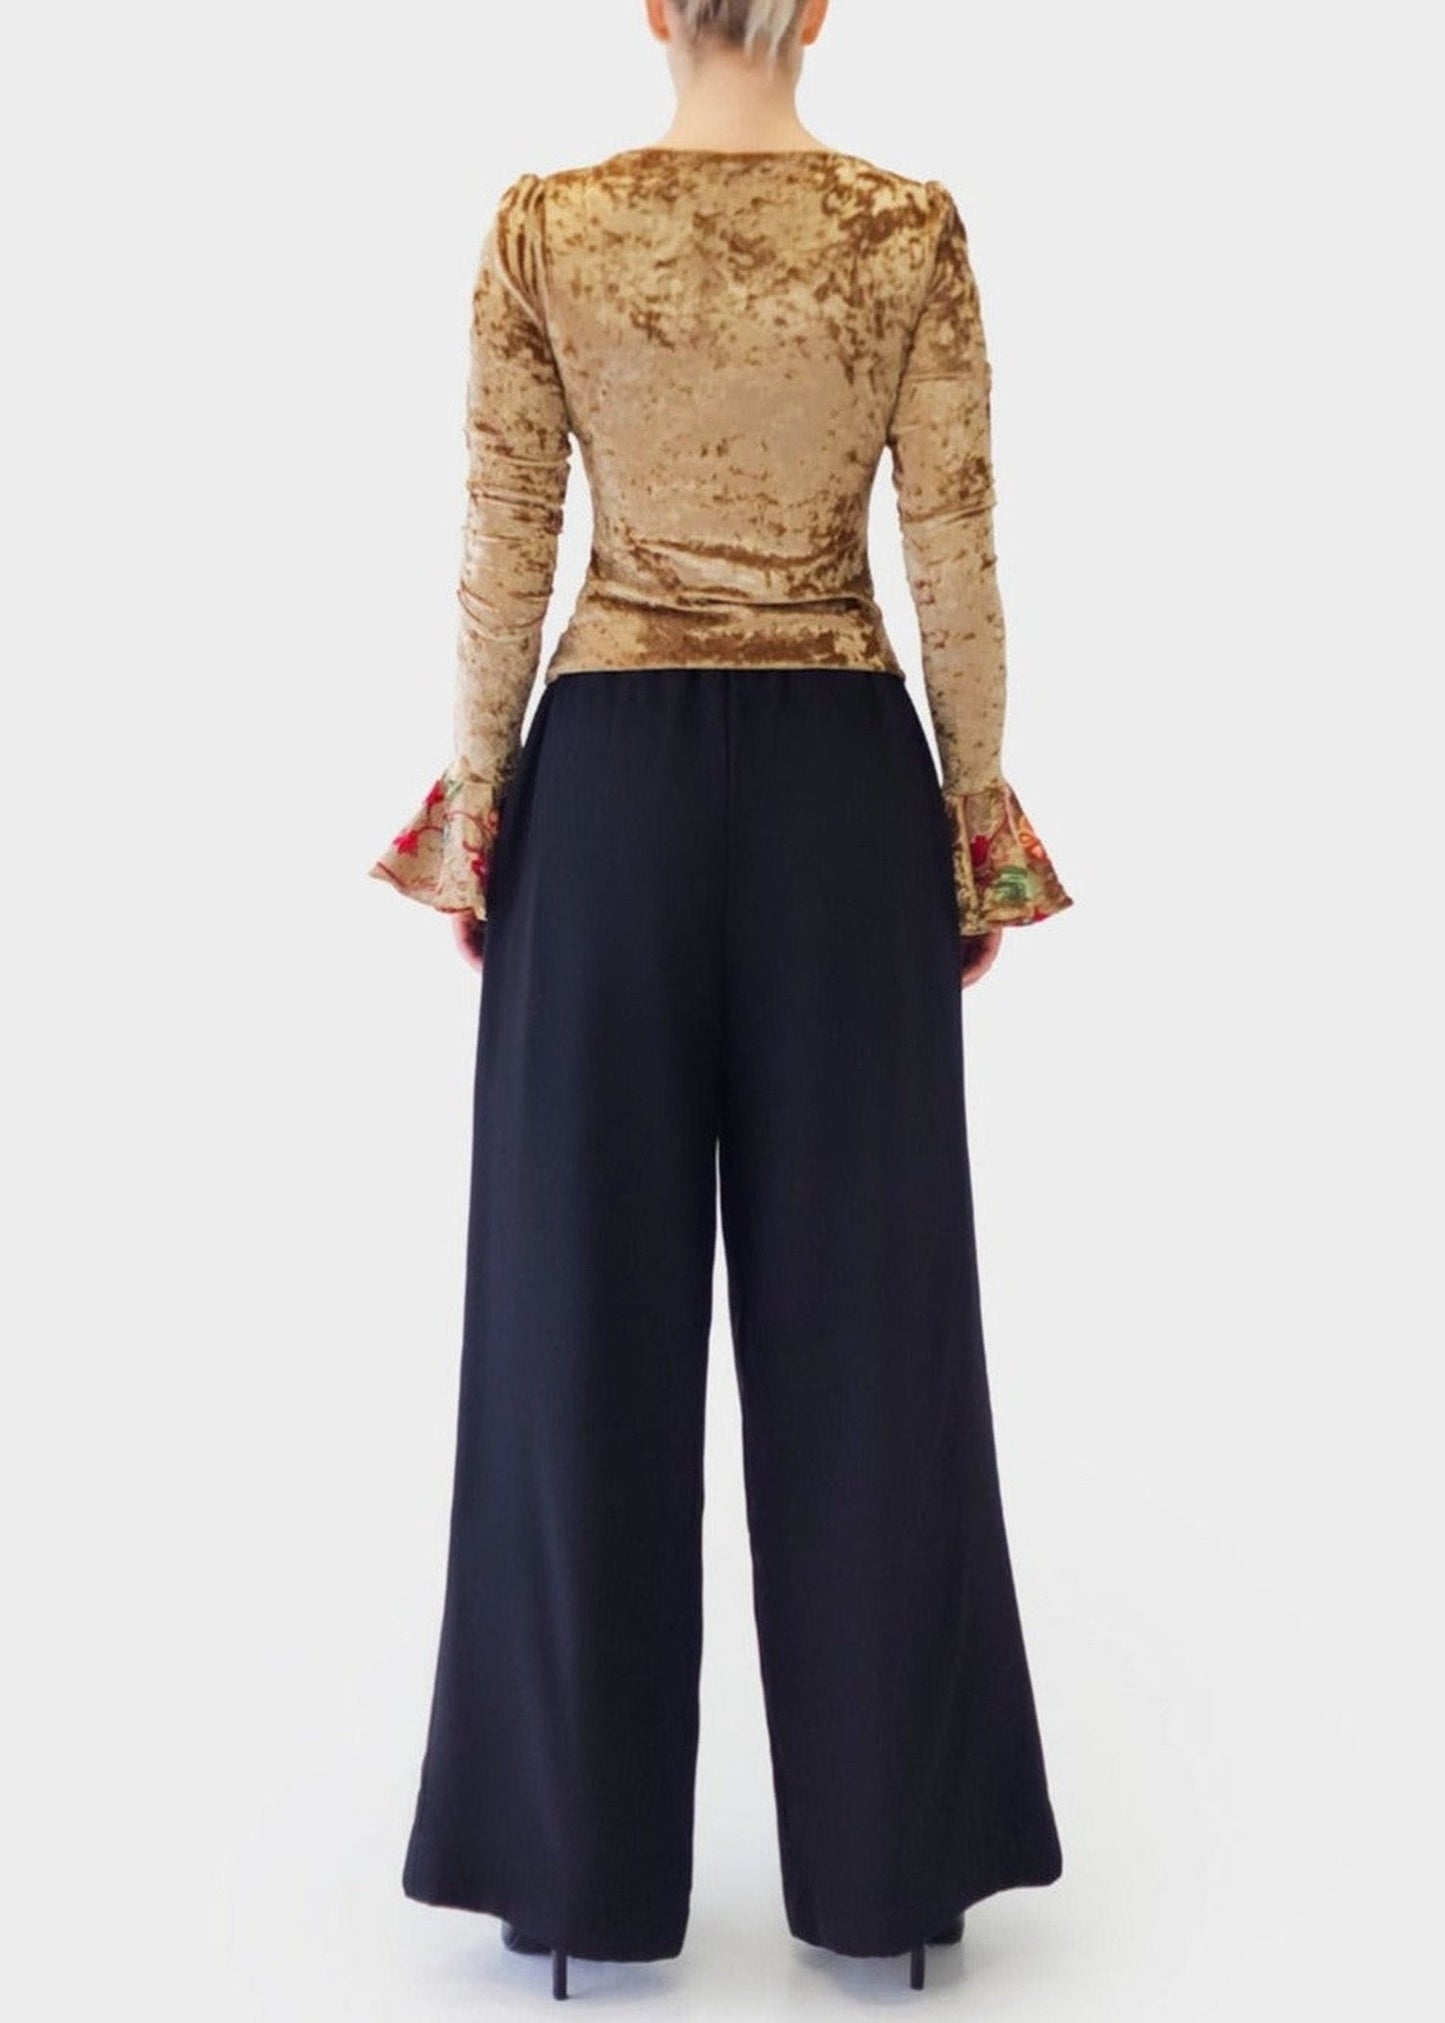 Tailored Waist Pleated Palazzo Pants - EB and Vory